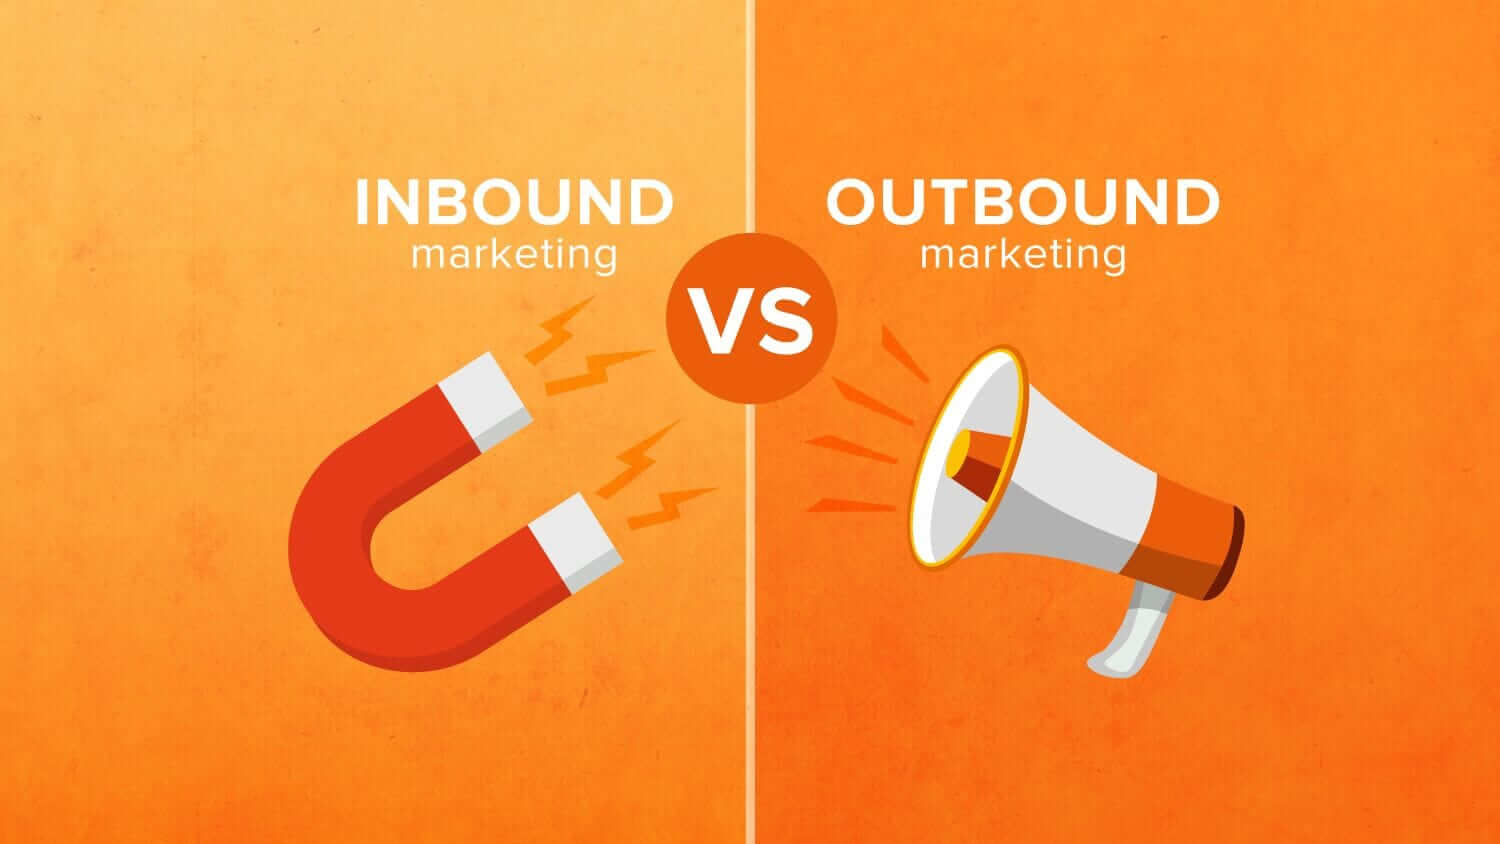 Inbound marketing focuses on creating quality content that attracts customers organically, while outbound marketing relies on traditional advertising methods such as TV commercials, print ads, and cold calls.